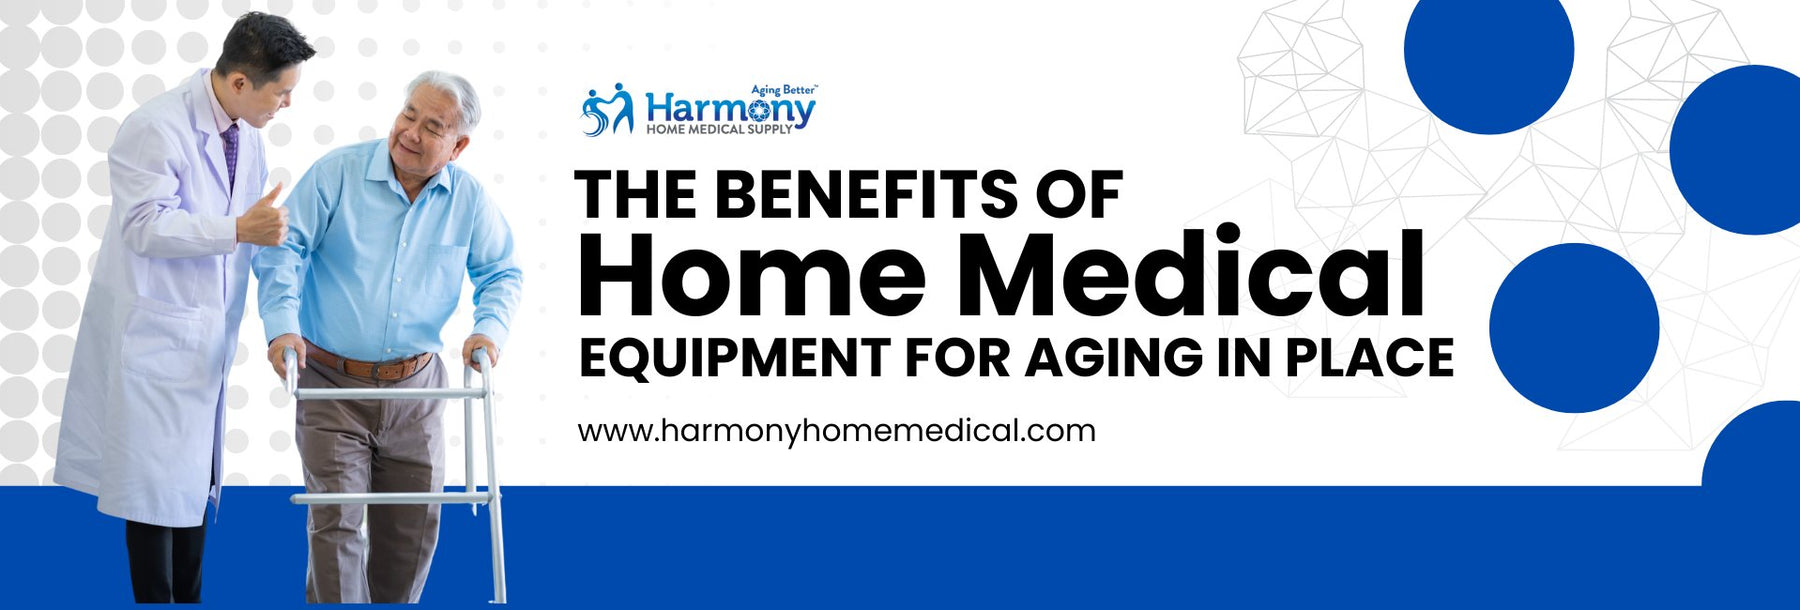 The Benefits of Home Medical Equipment for Aging in Place - Harmony Home Medical Supply